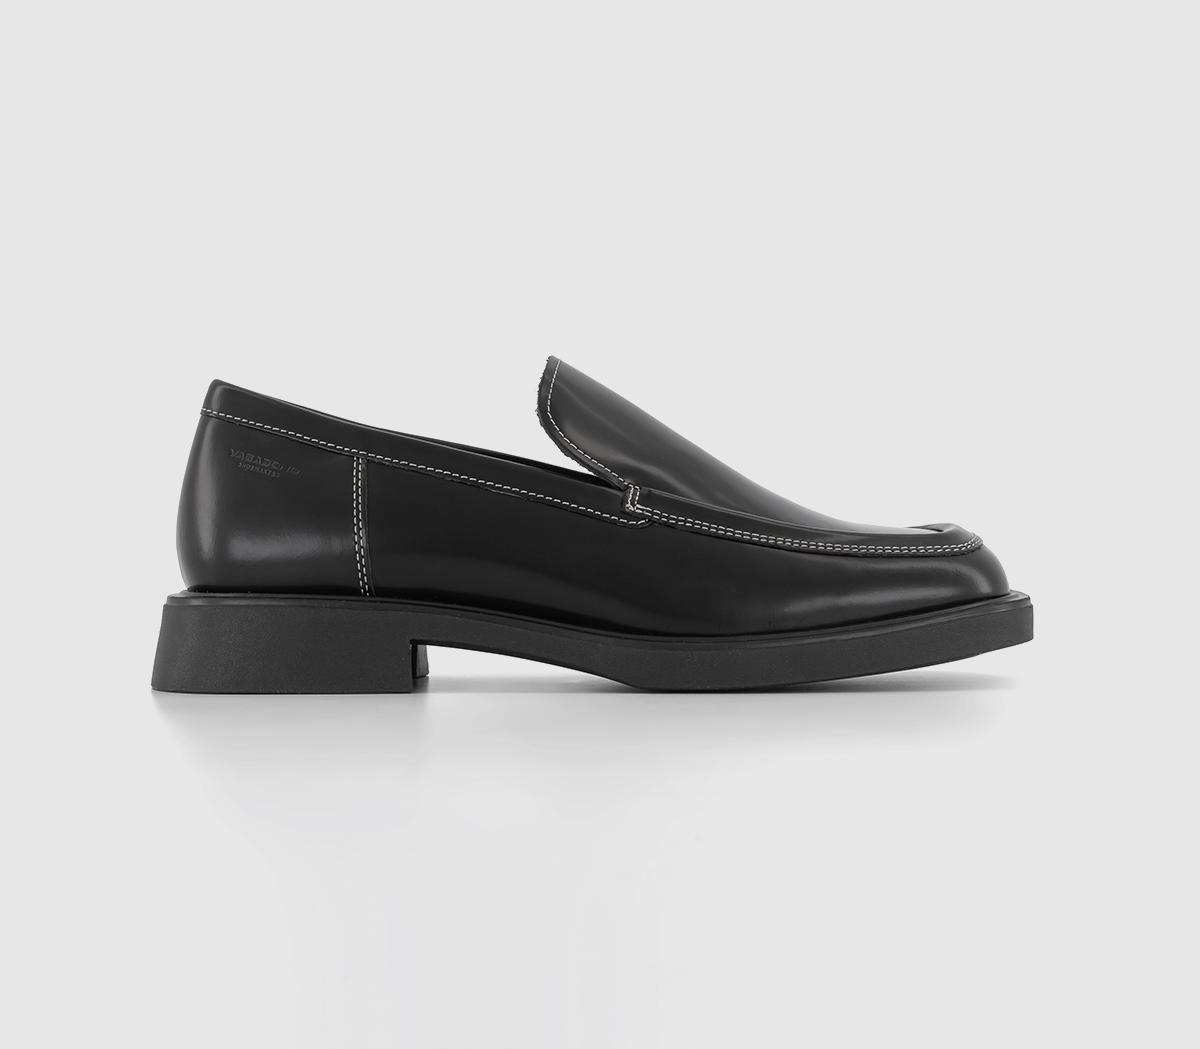 Jacly Loafers Black Polished Leather